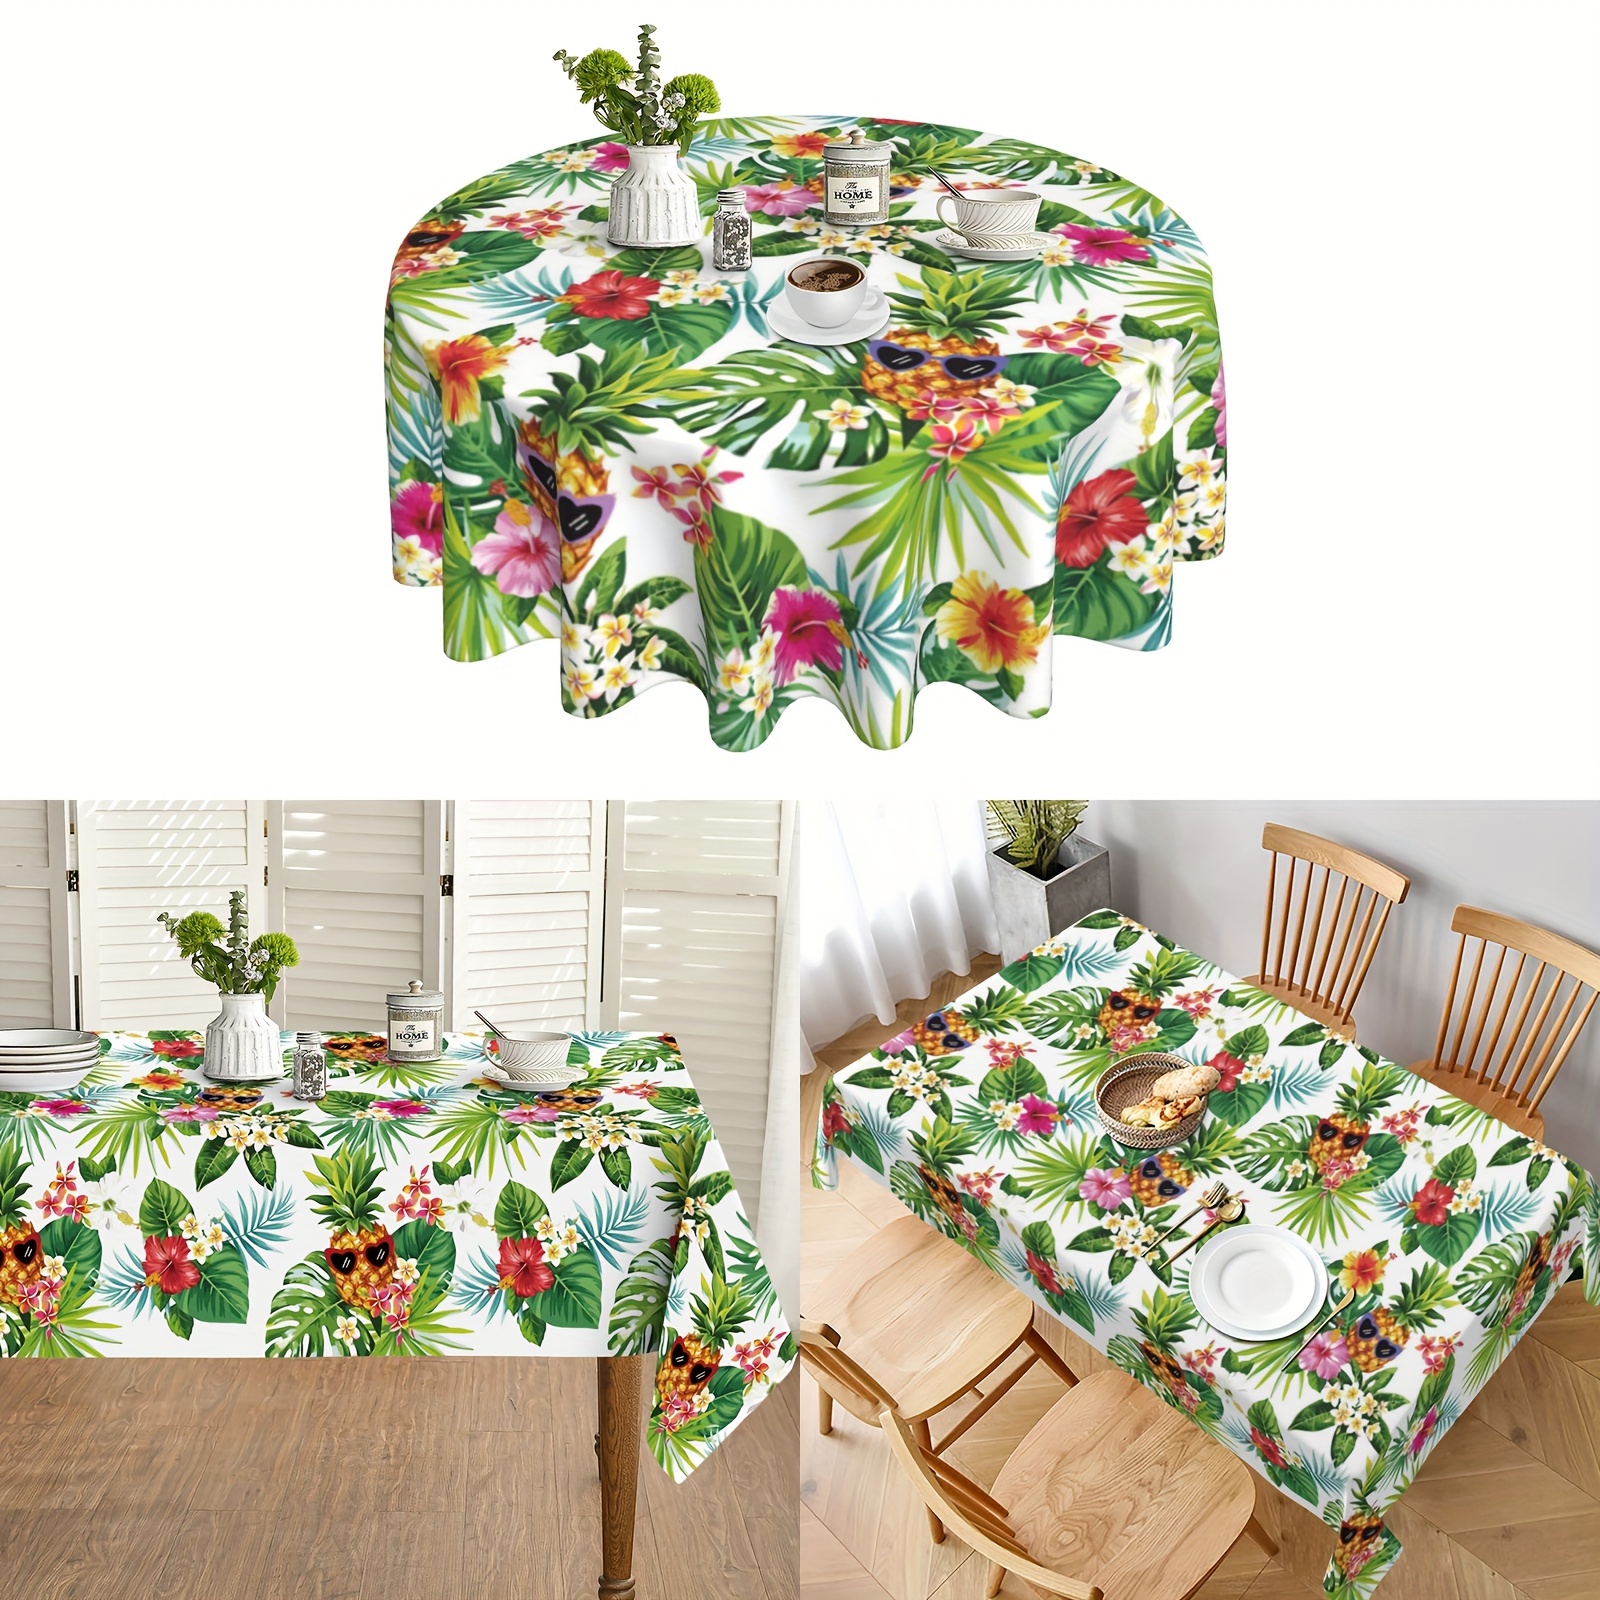 

1pc, Polyester Tablecloth, Hawaiian Pineapple Tropical Table Cover, Palm Leaves Table Cloth, Waterproof Stain Wrinkle Free Green Tablecloth, For Home Kitchen Dining Party Decoration, Room Decor